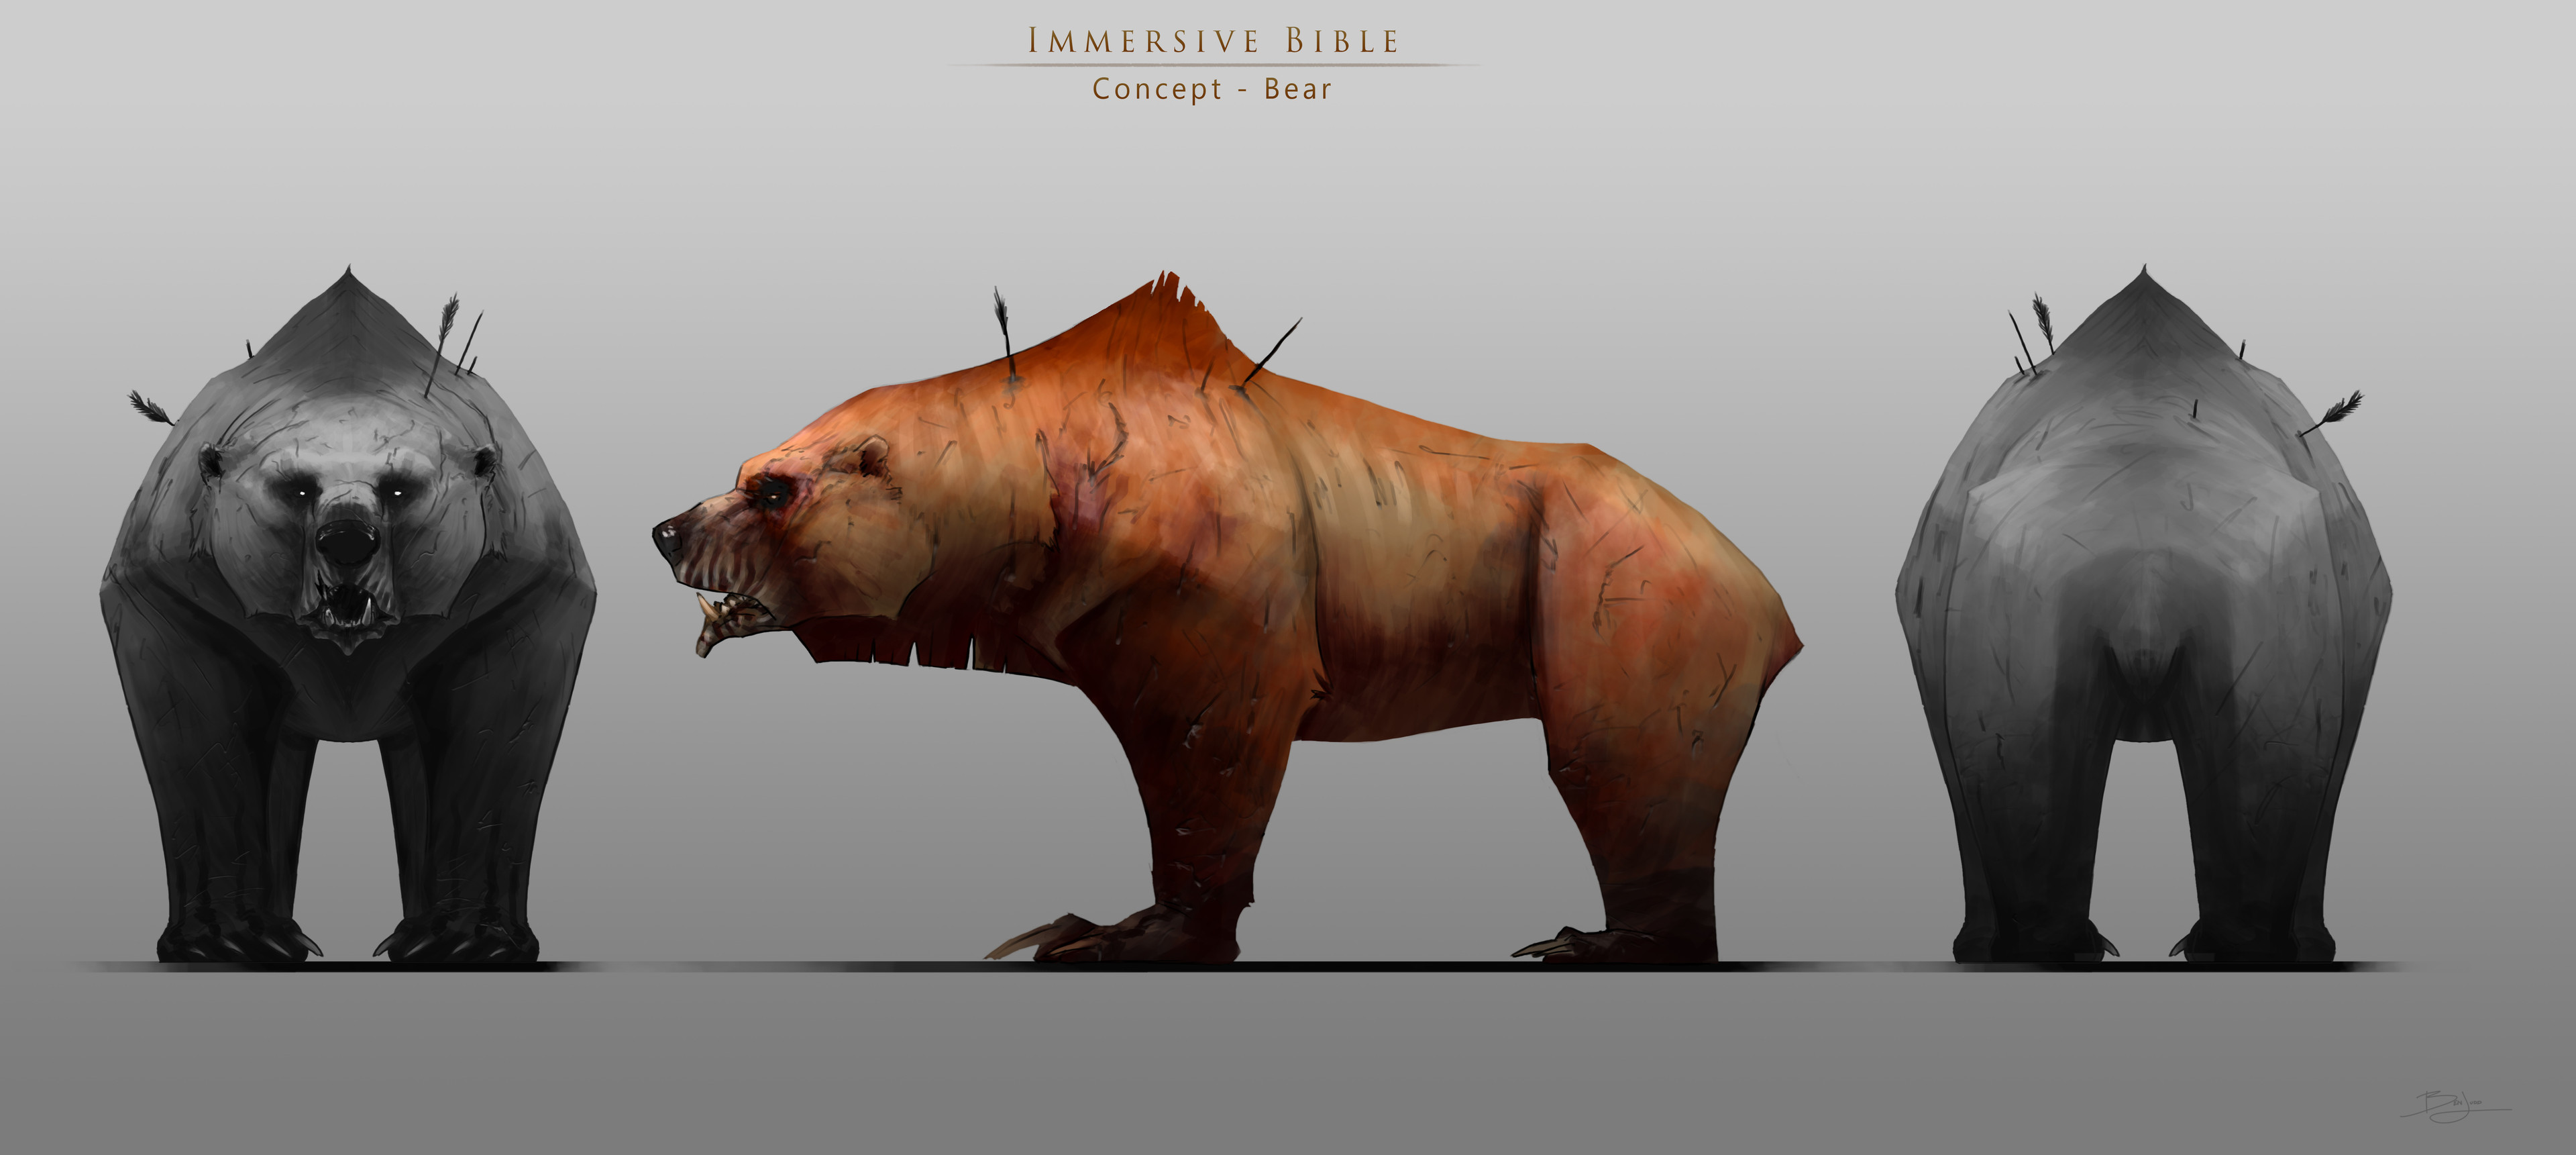 Final Bear Concept. Color inspired by the intense color some syrian brown bears have. 